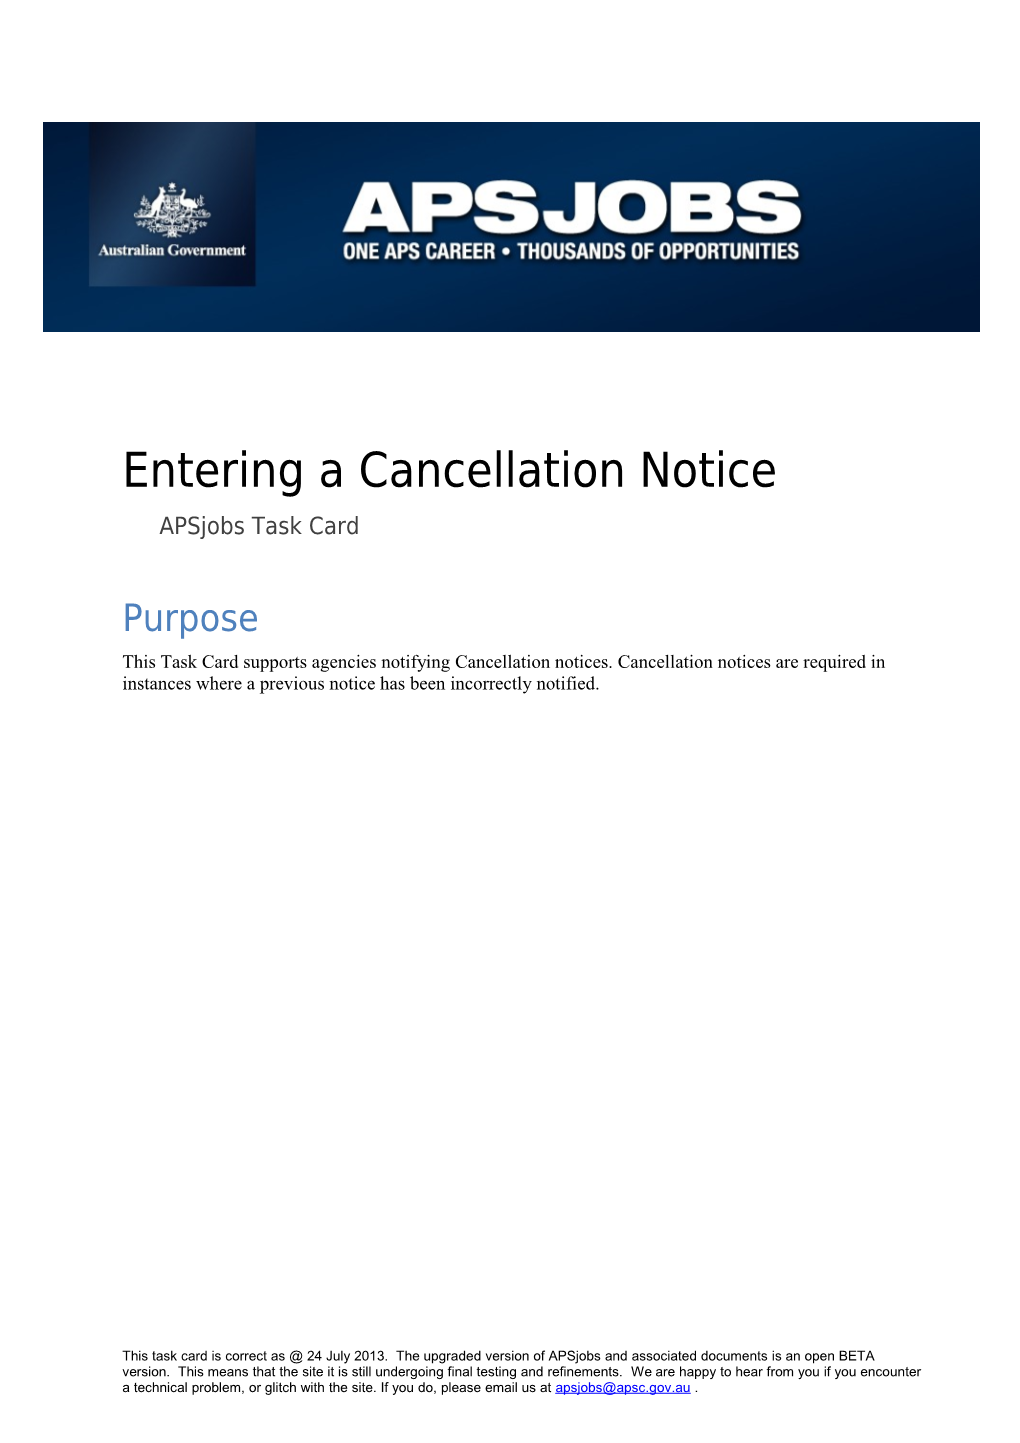 Entering a Cancellationnoticeapsjobs Task Card